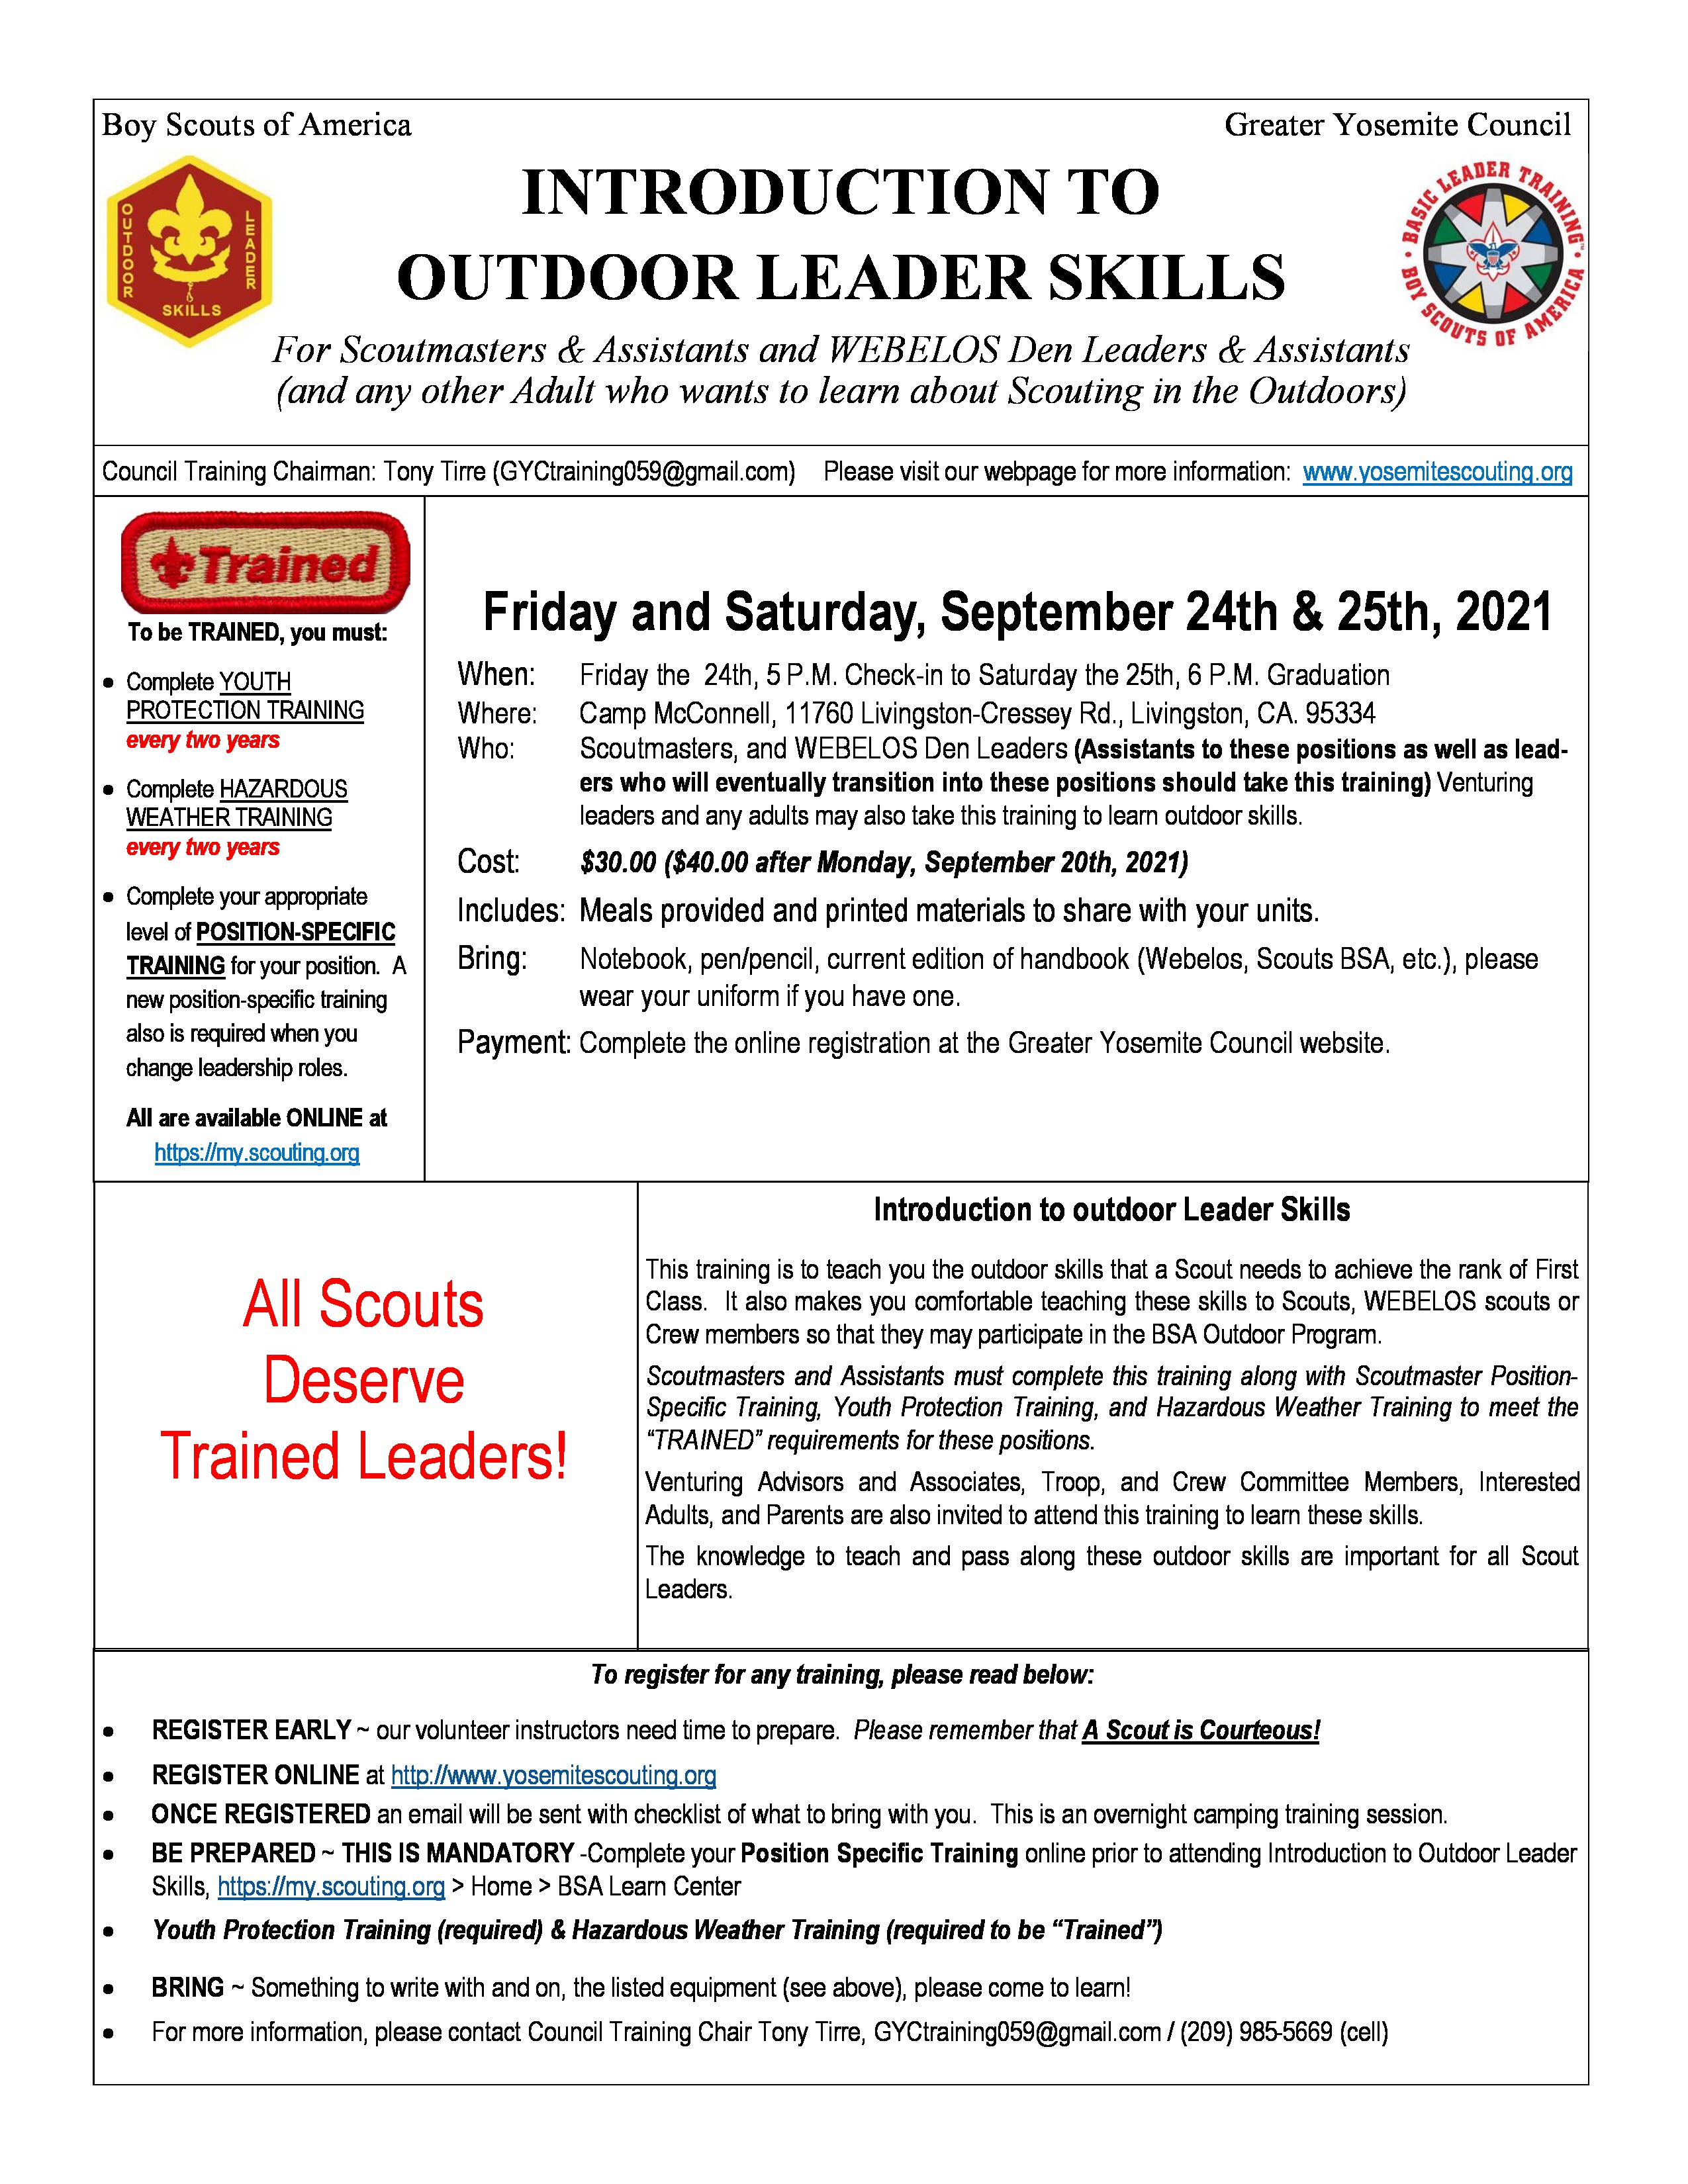 Introduction to Outdoor Leader Skills 2021 